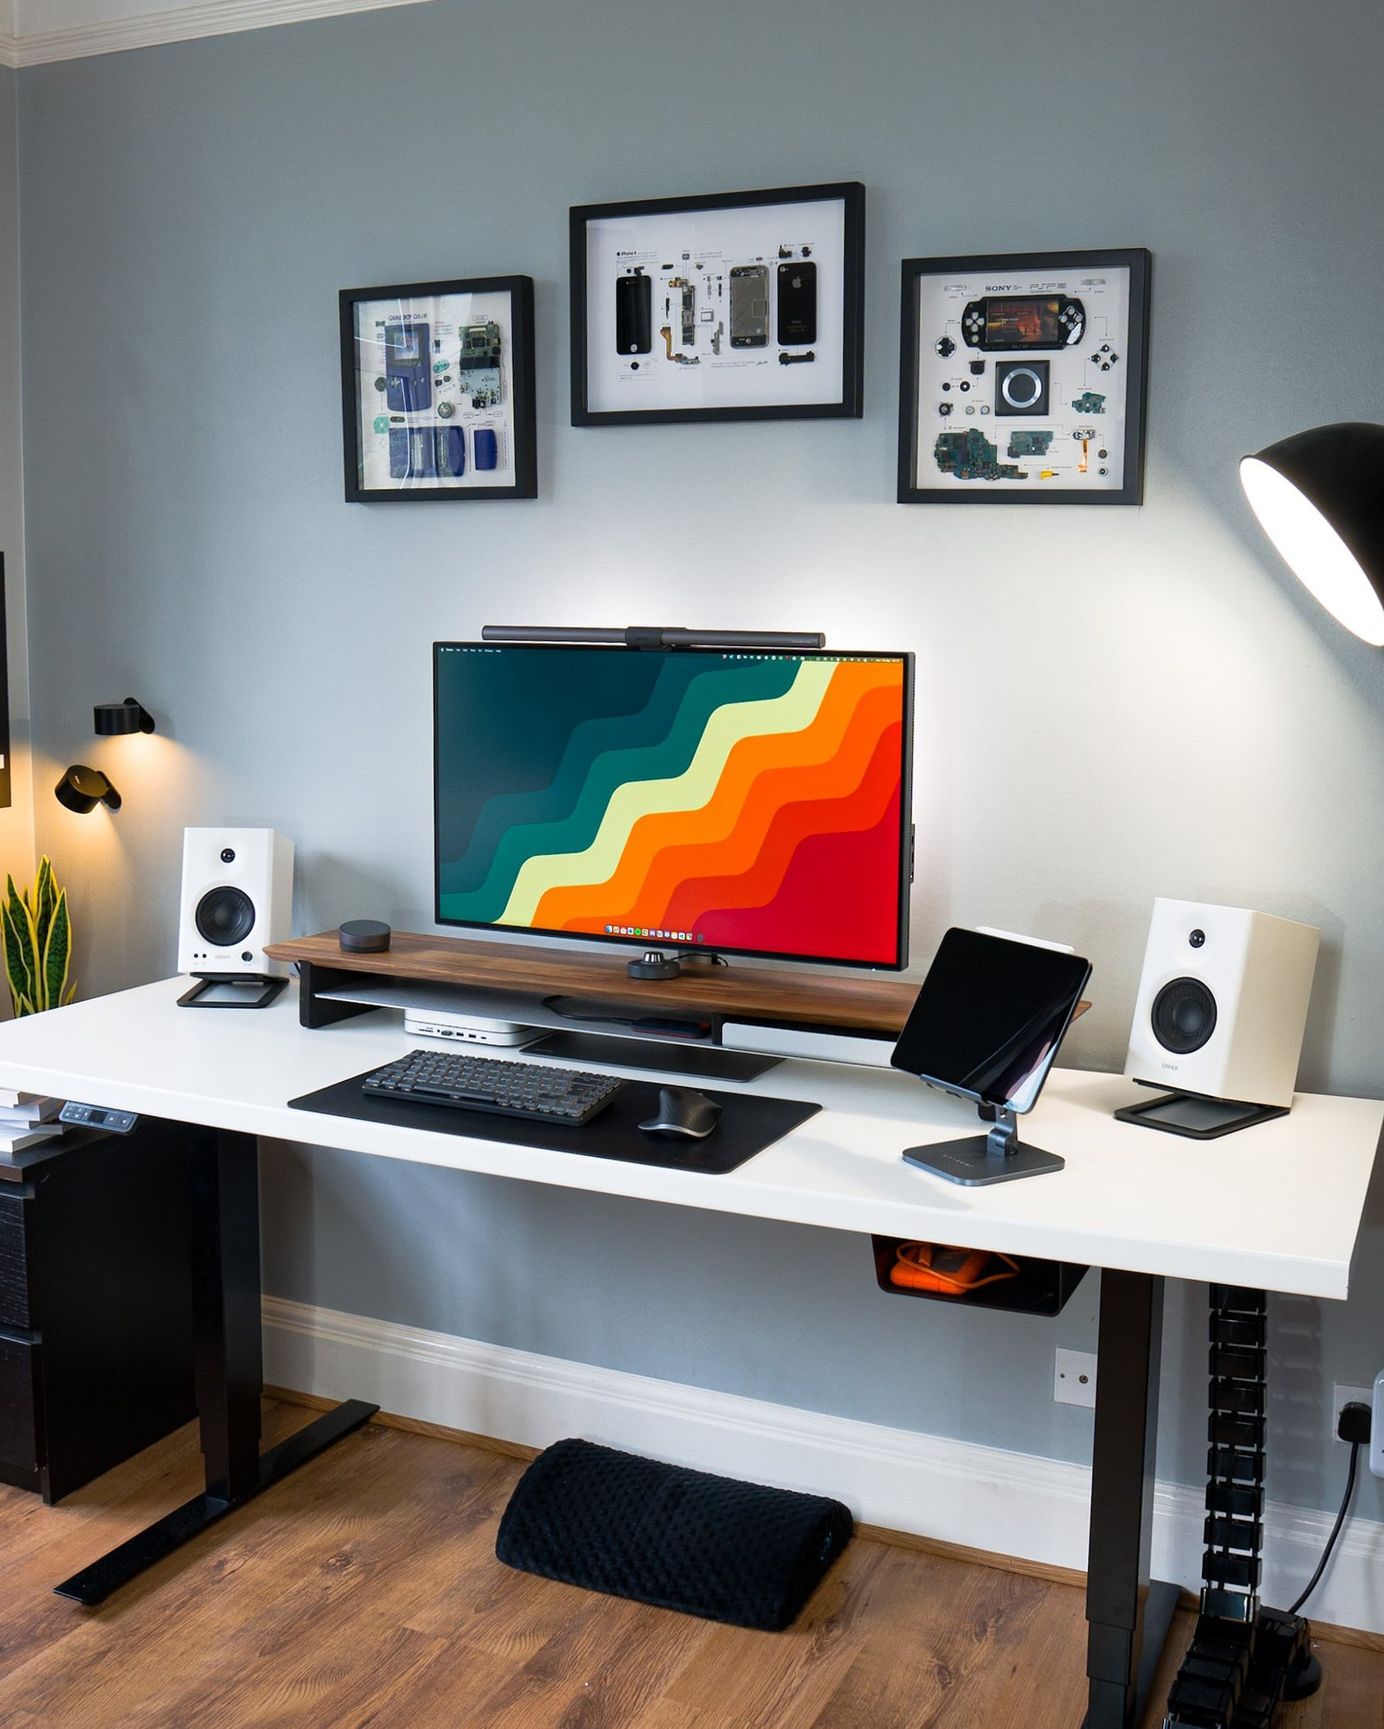 Programmers’ and Developers’ Home Office Setups for Your Inspiration